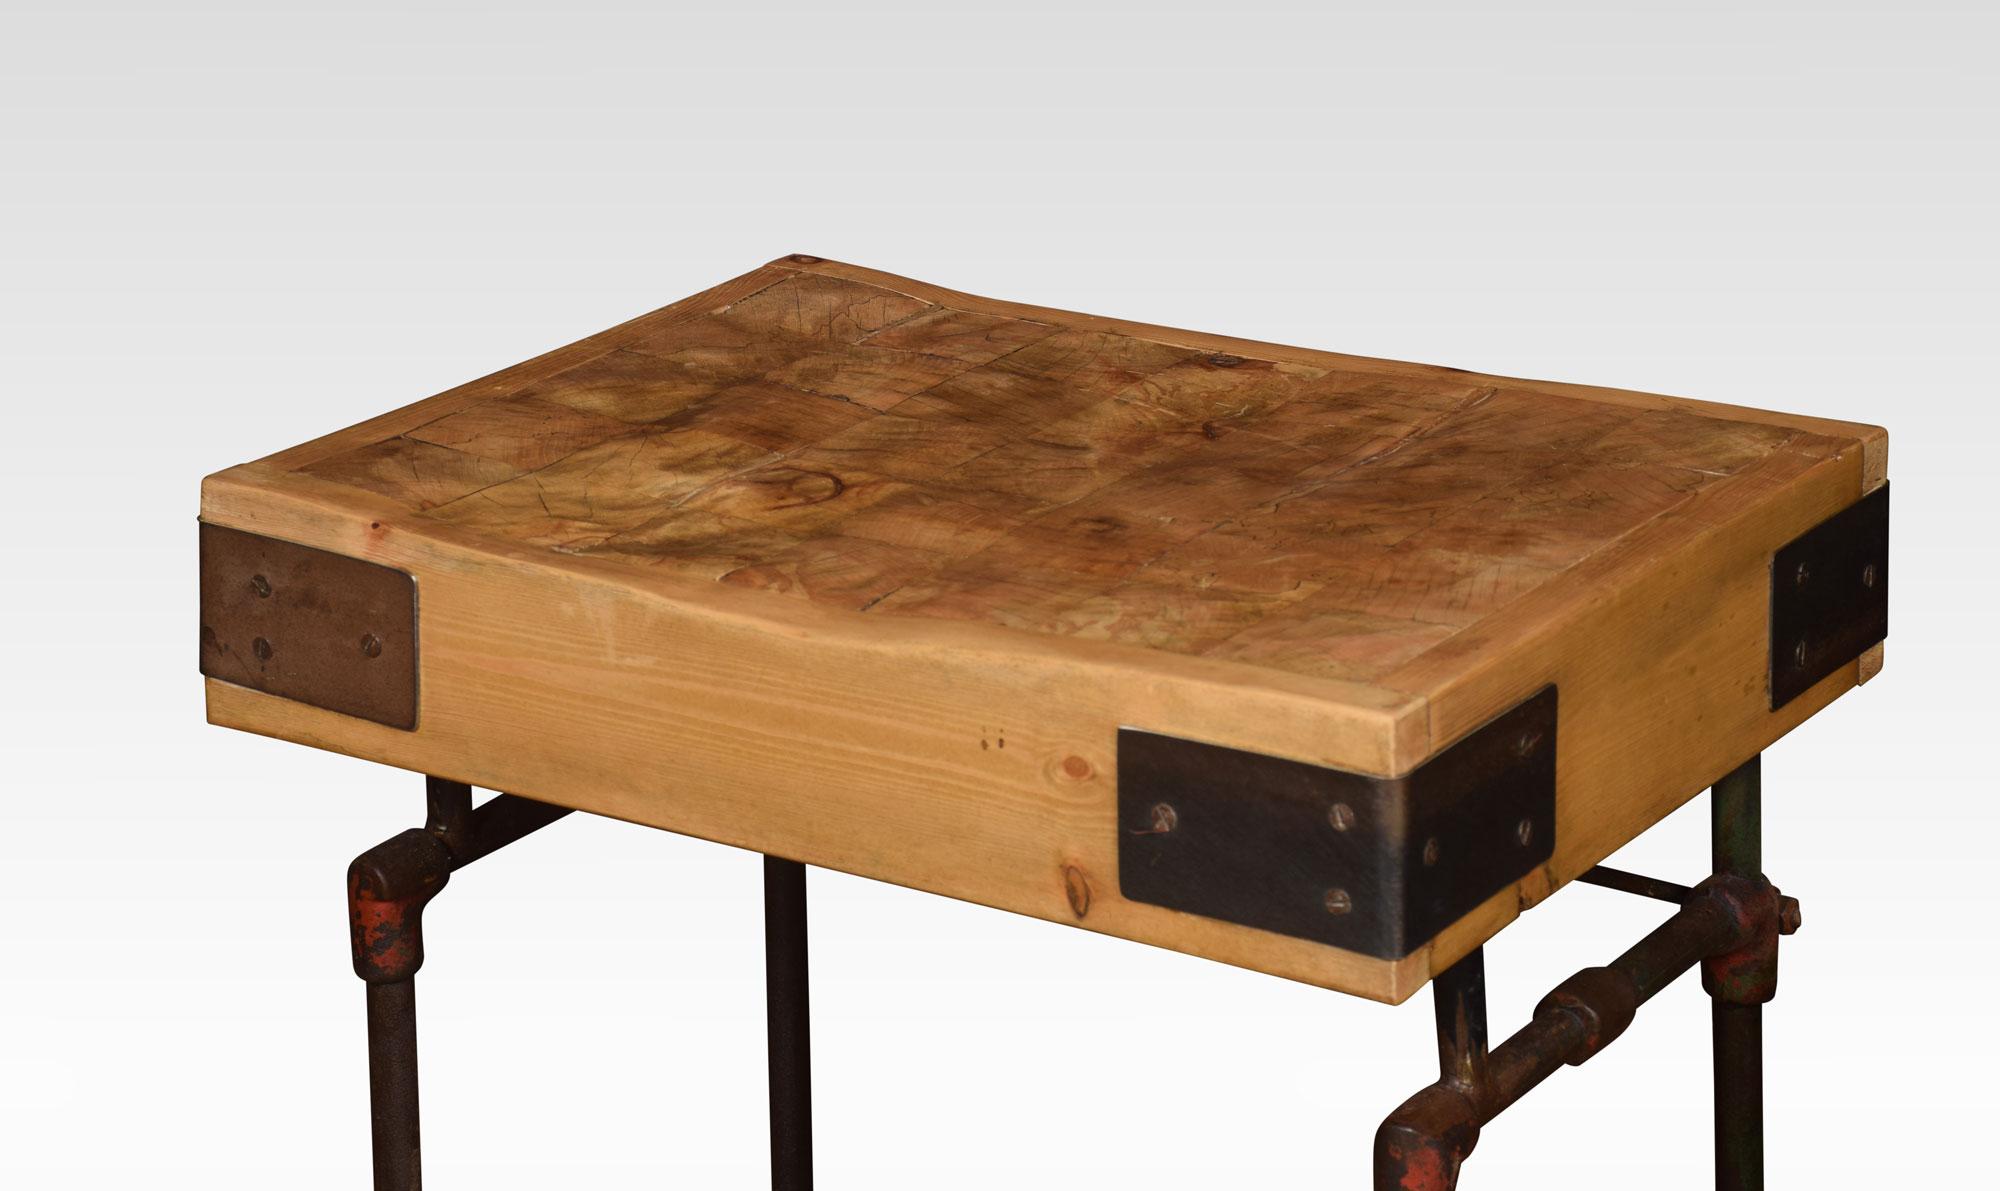 A butcher’s block of rectangular form on wrought iron frame and castors.
Dimensions:
Height 31 inches
Width 29.5 inches
Depth 23 inches.